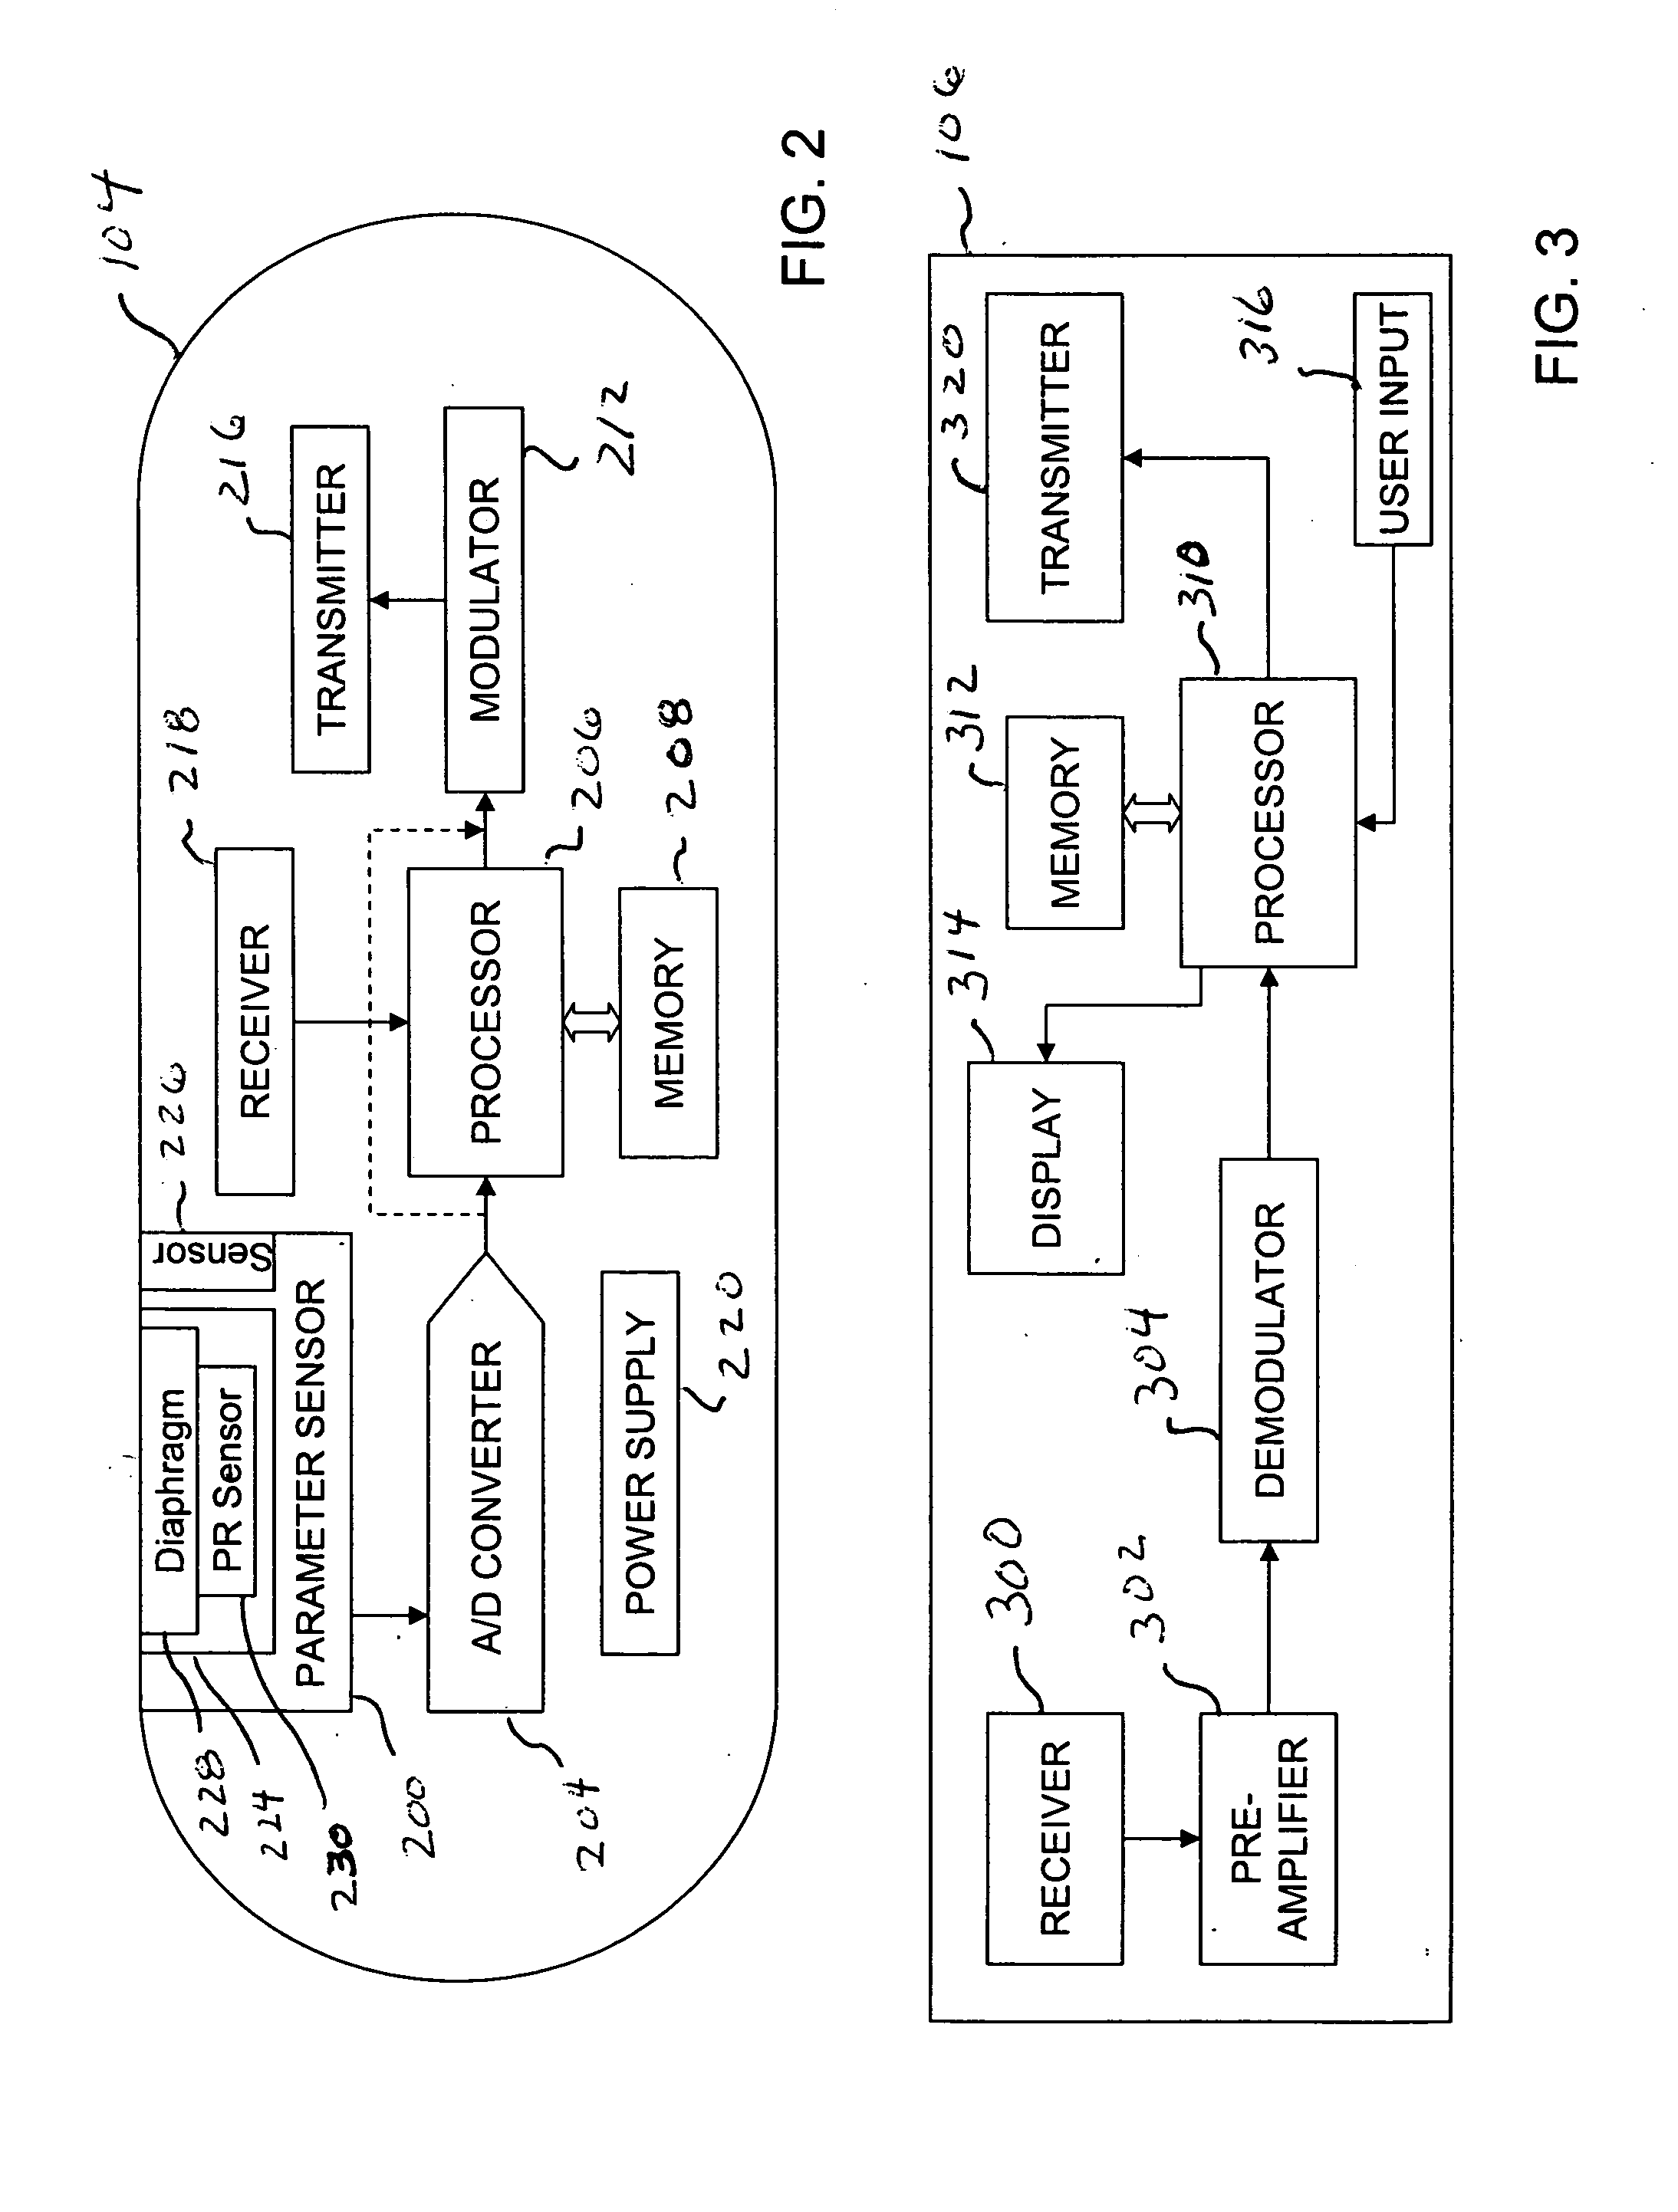 Implantable telemetric monitoring system, apparatus, and method